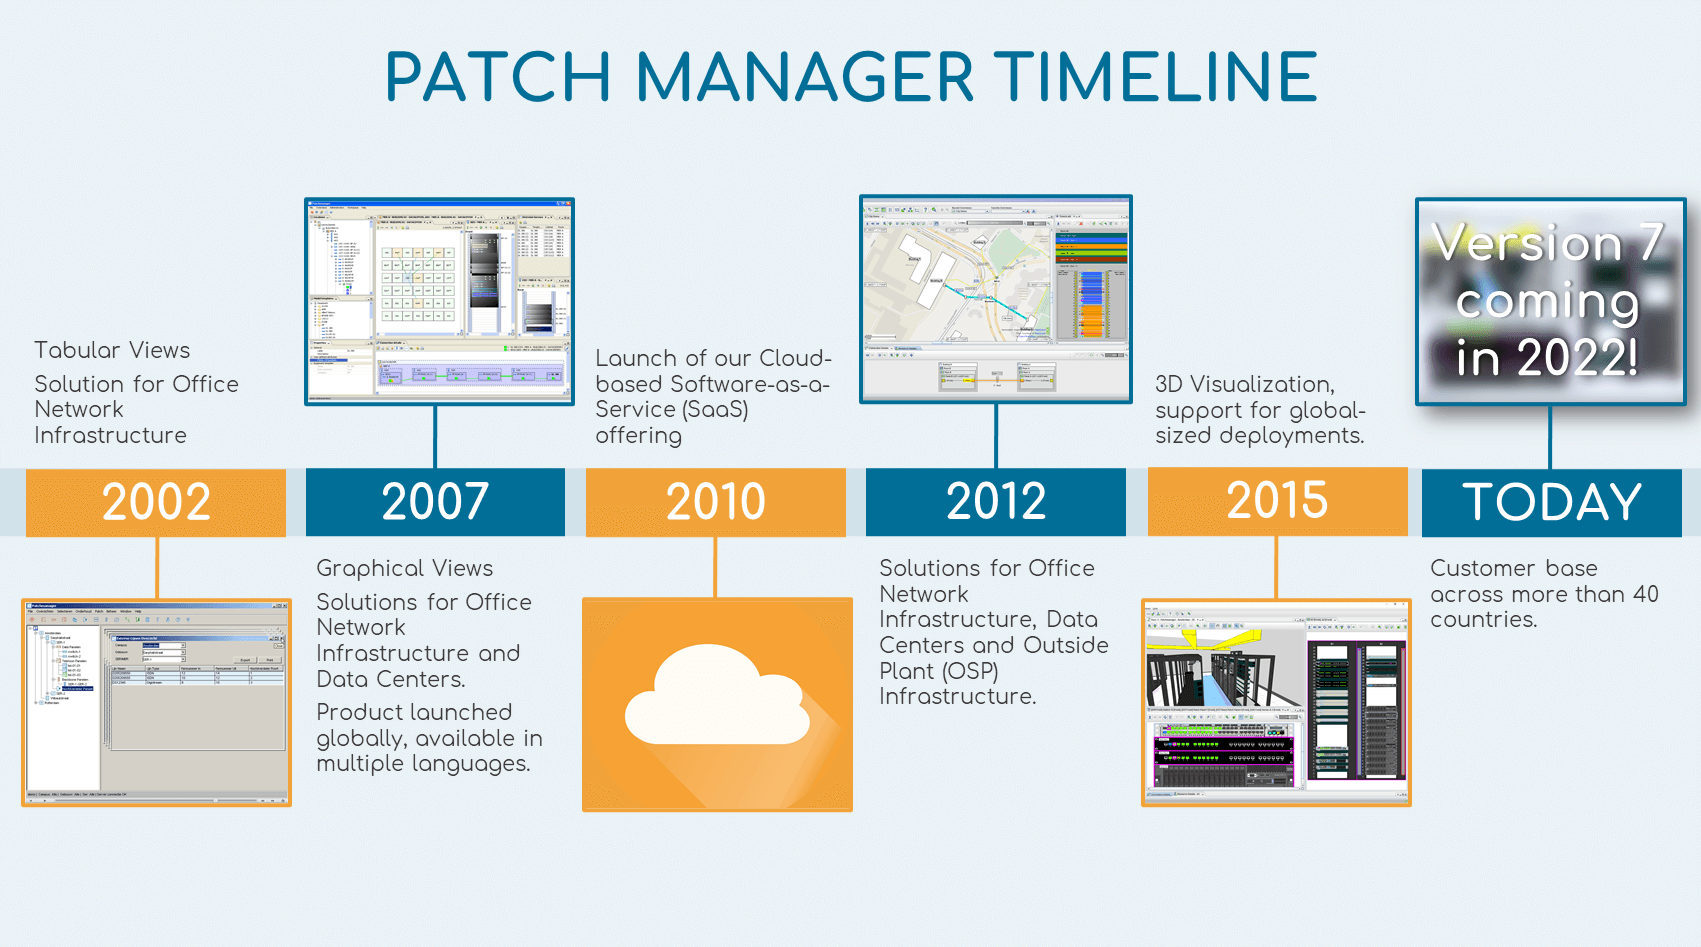 PATCH MANAGER timeline